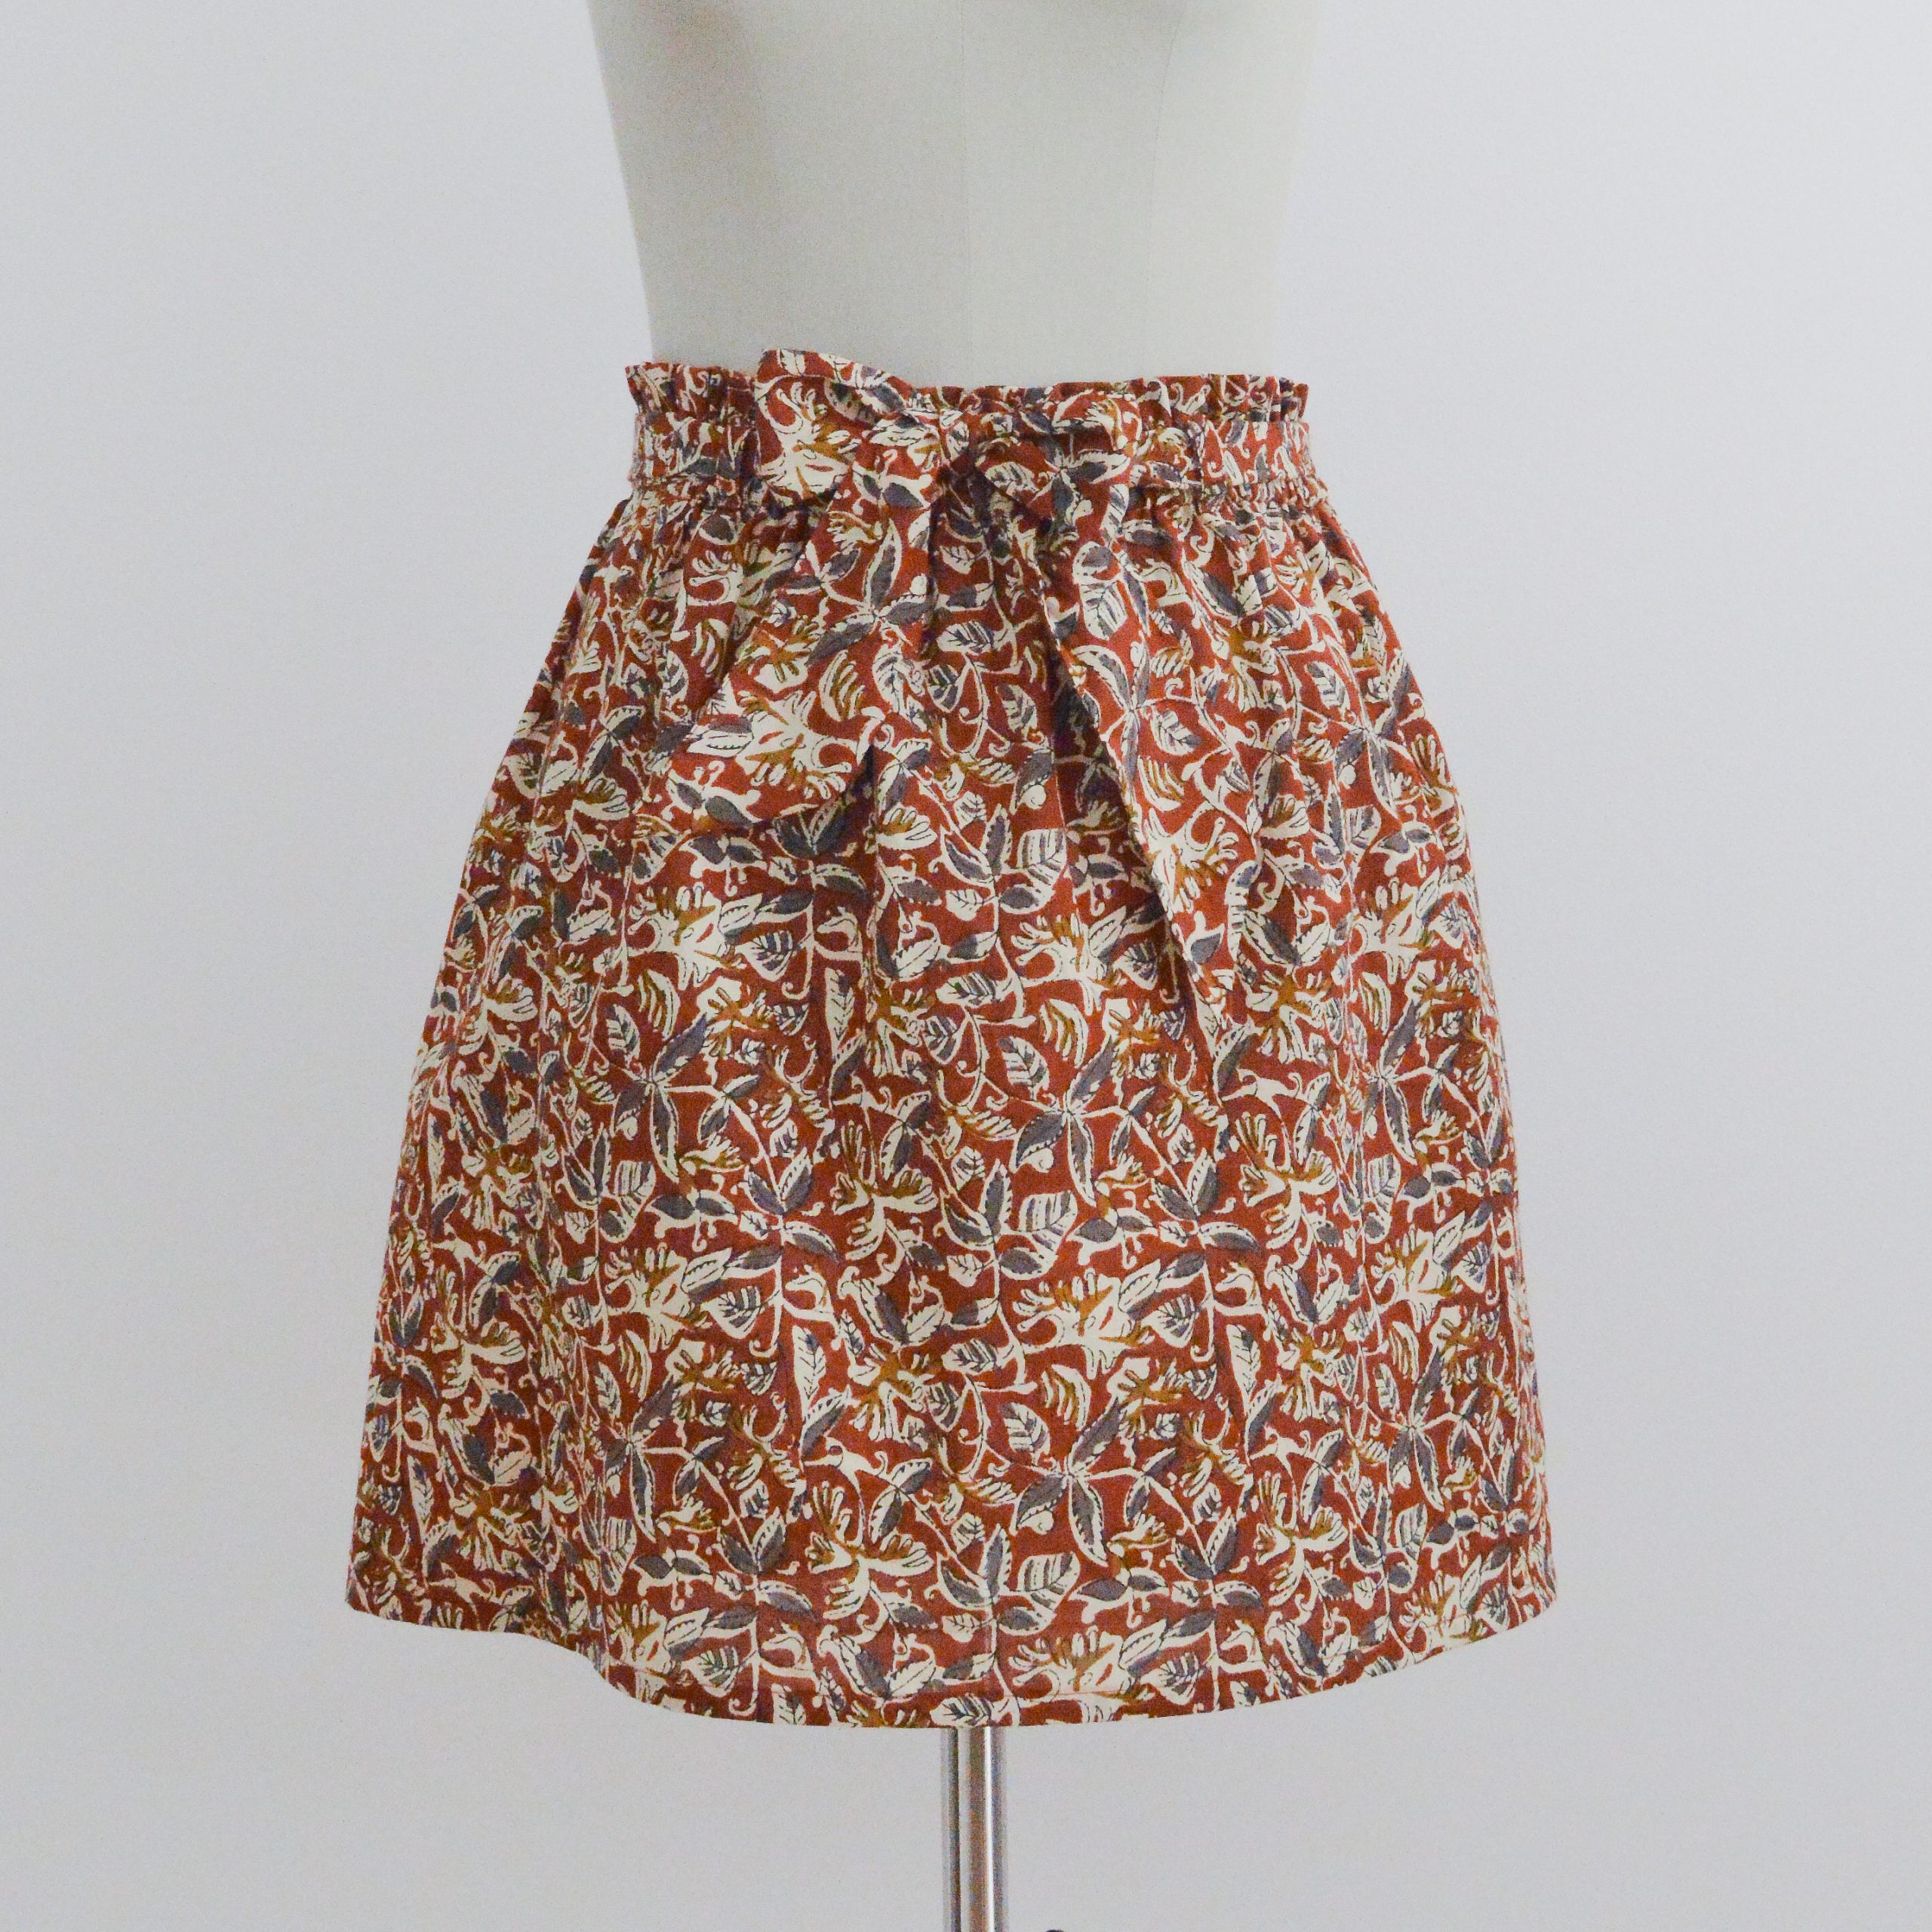 Introducing the Havana Skirt: Your Gateway to Stylish and Easy Sewing